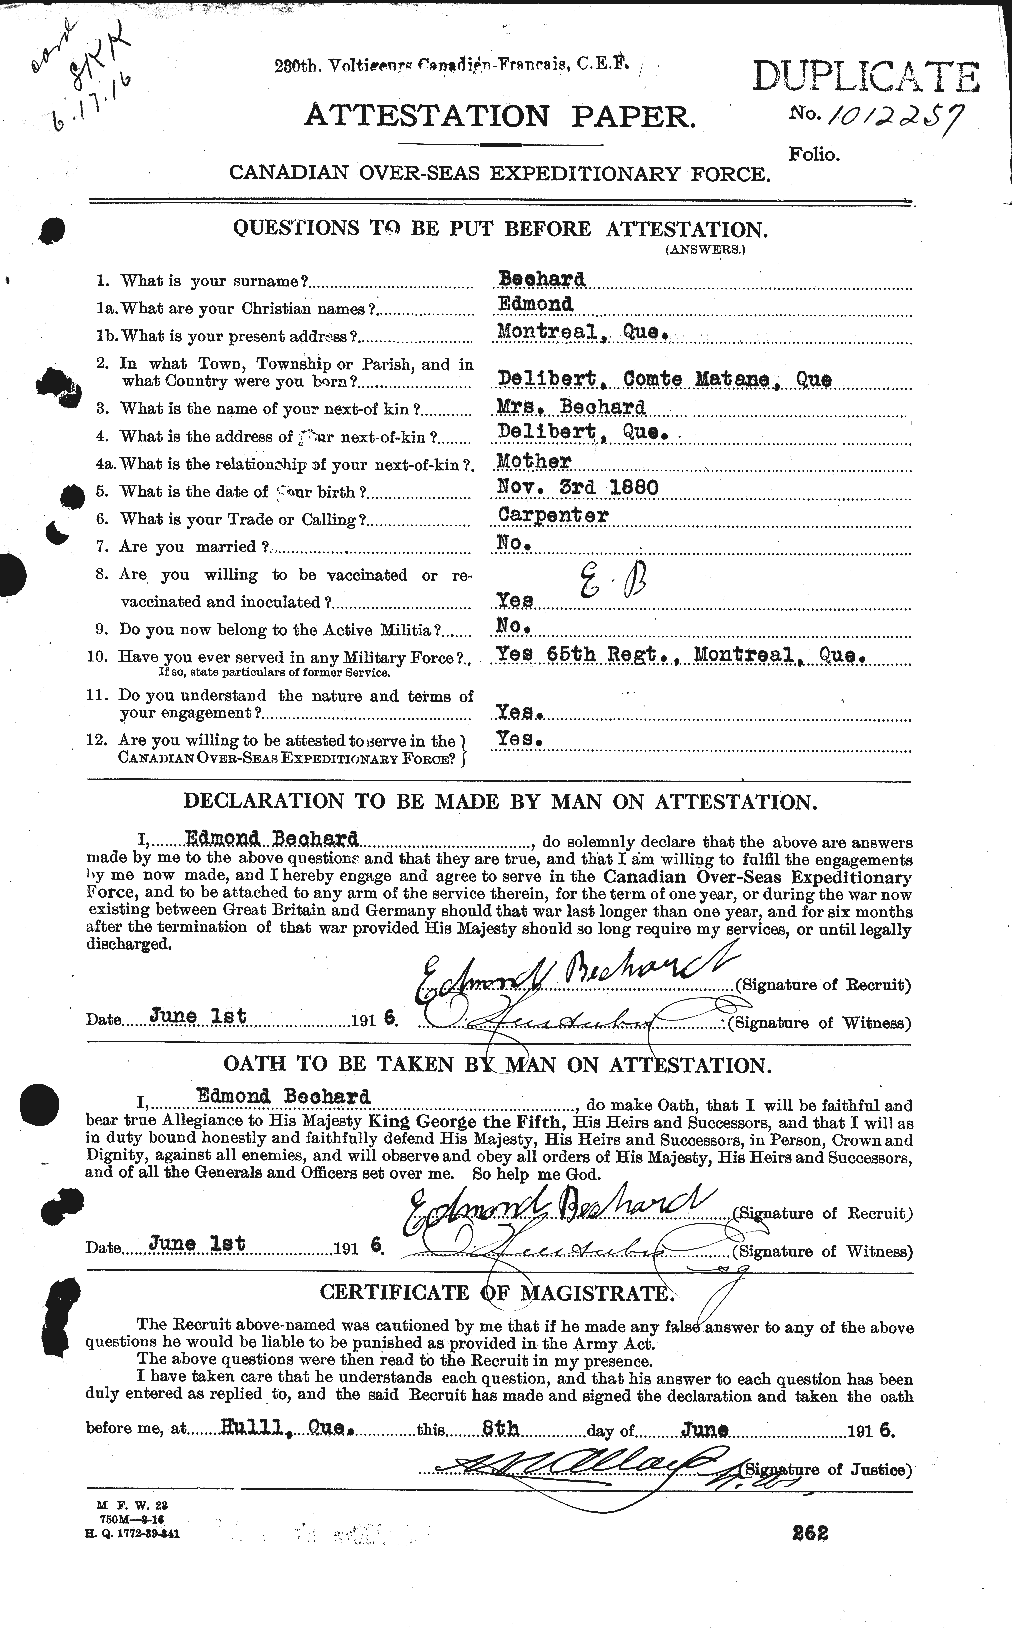 Personnel Records of the First World War - CEF 232023a